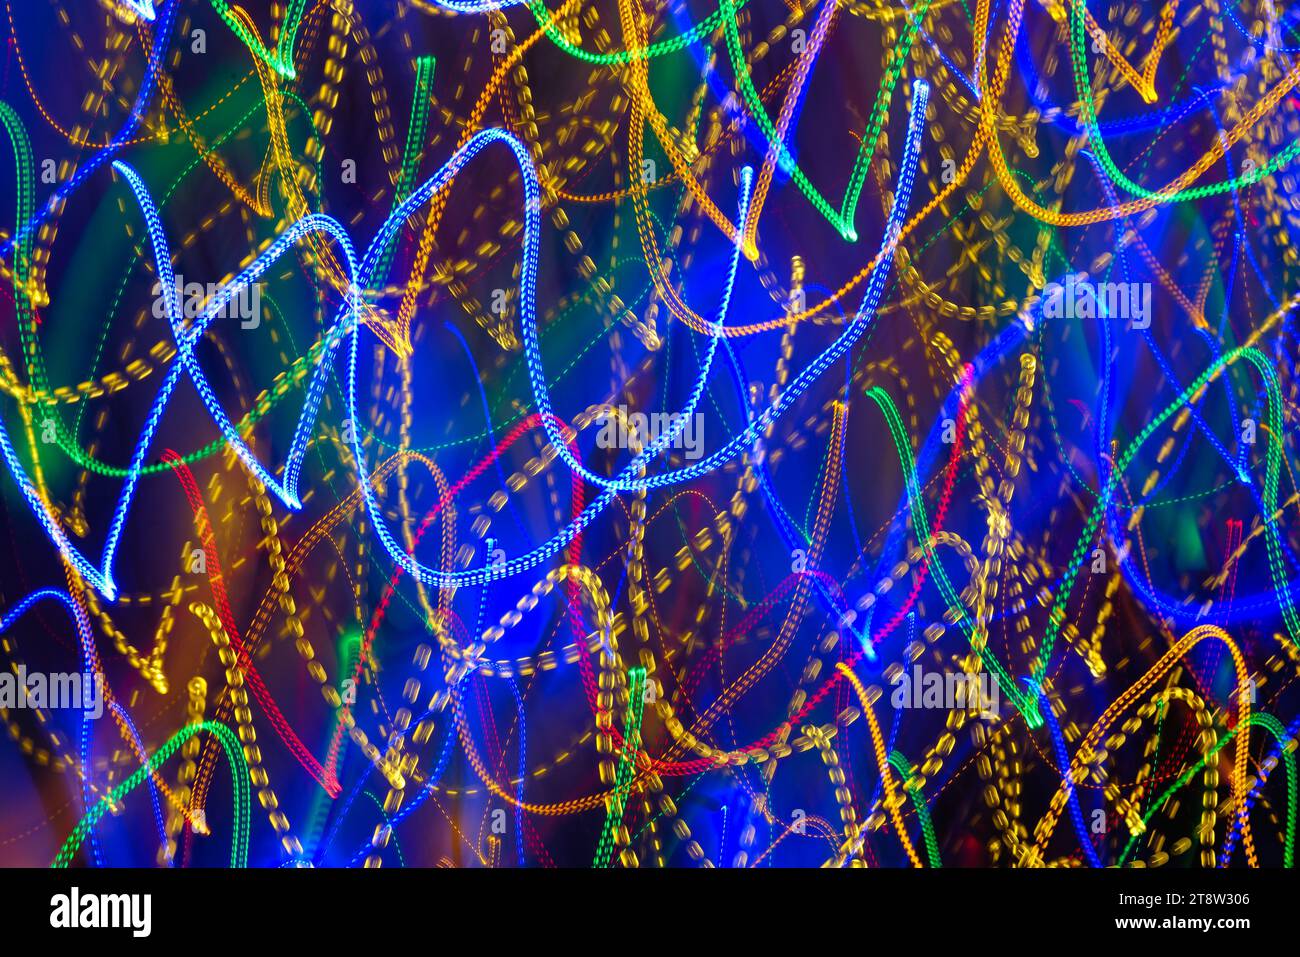 Blurred multi coloured light patterns streaks against a dark background creating abstract shapes Stock Photo